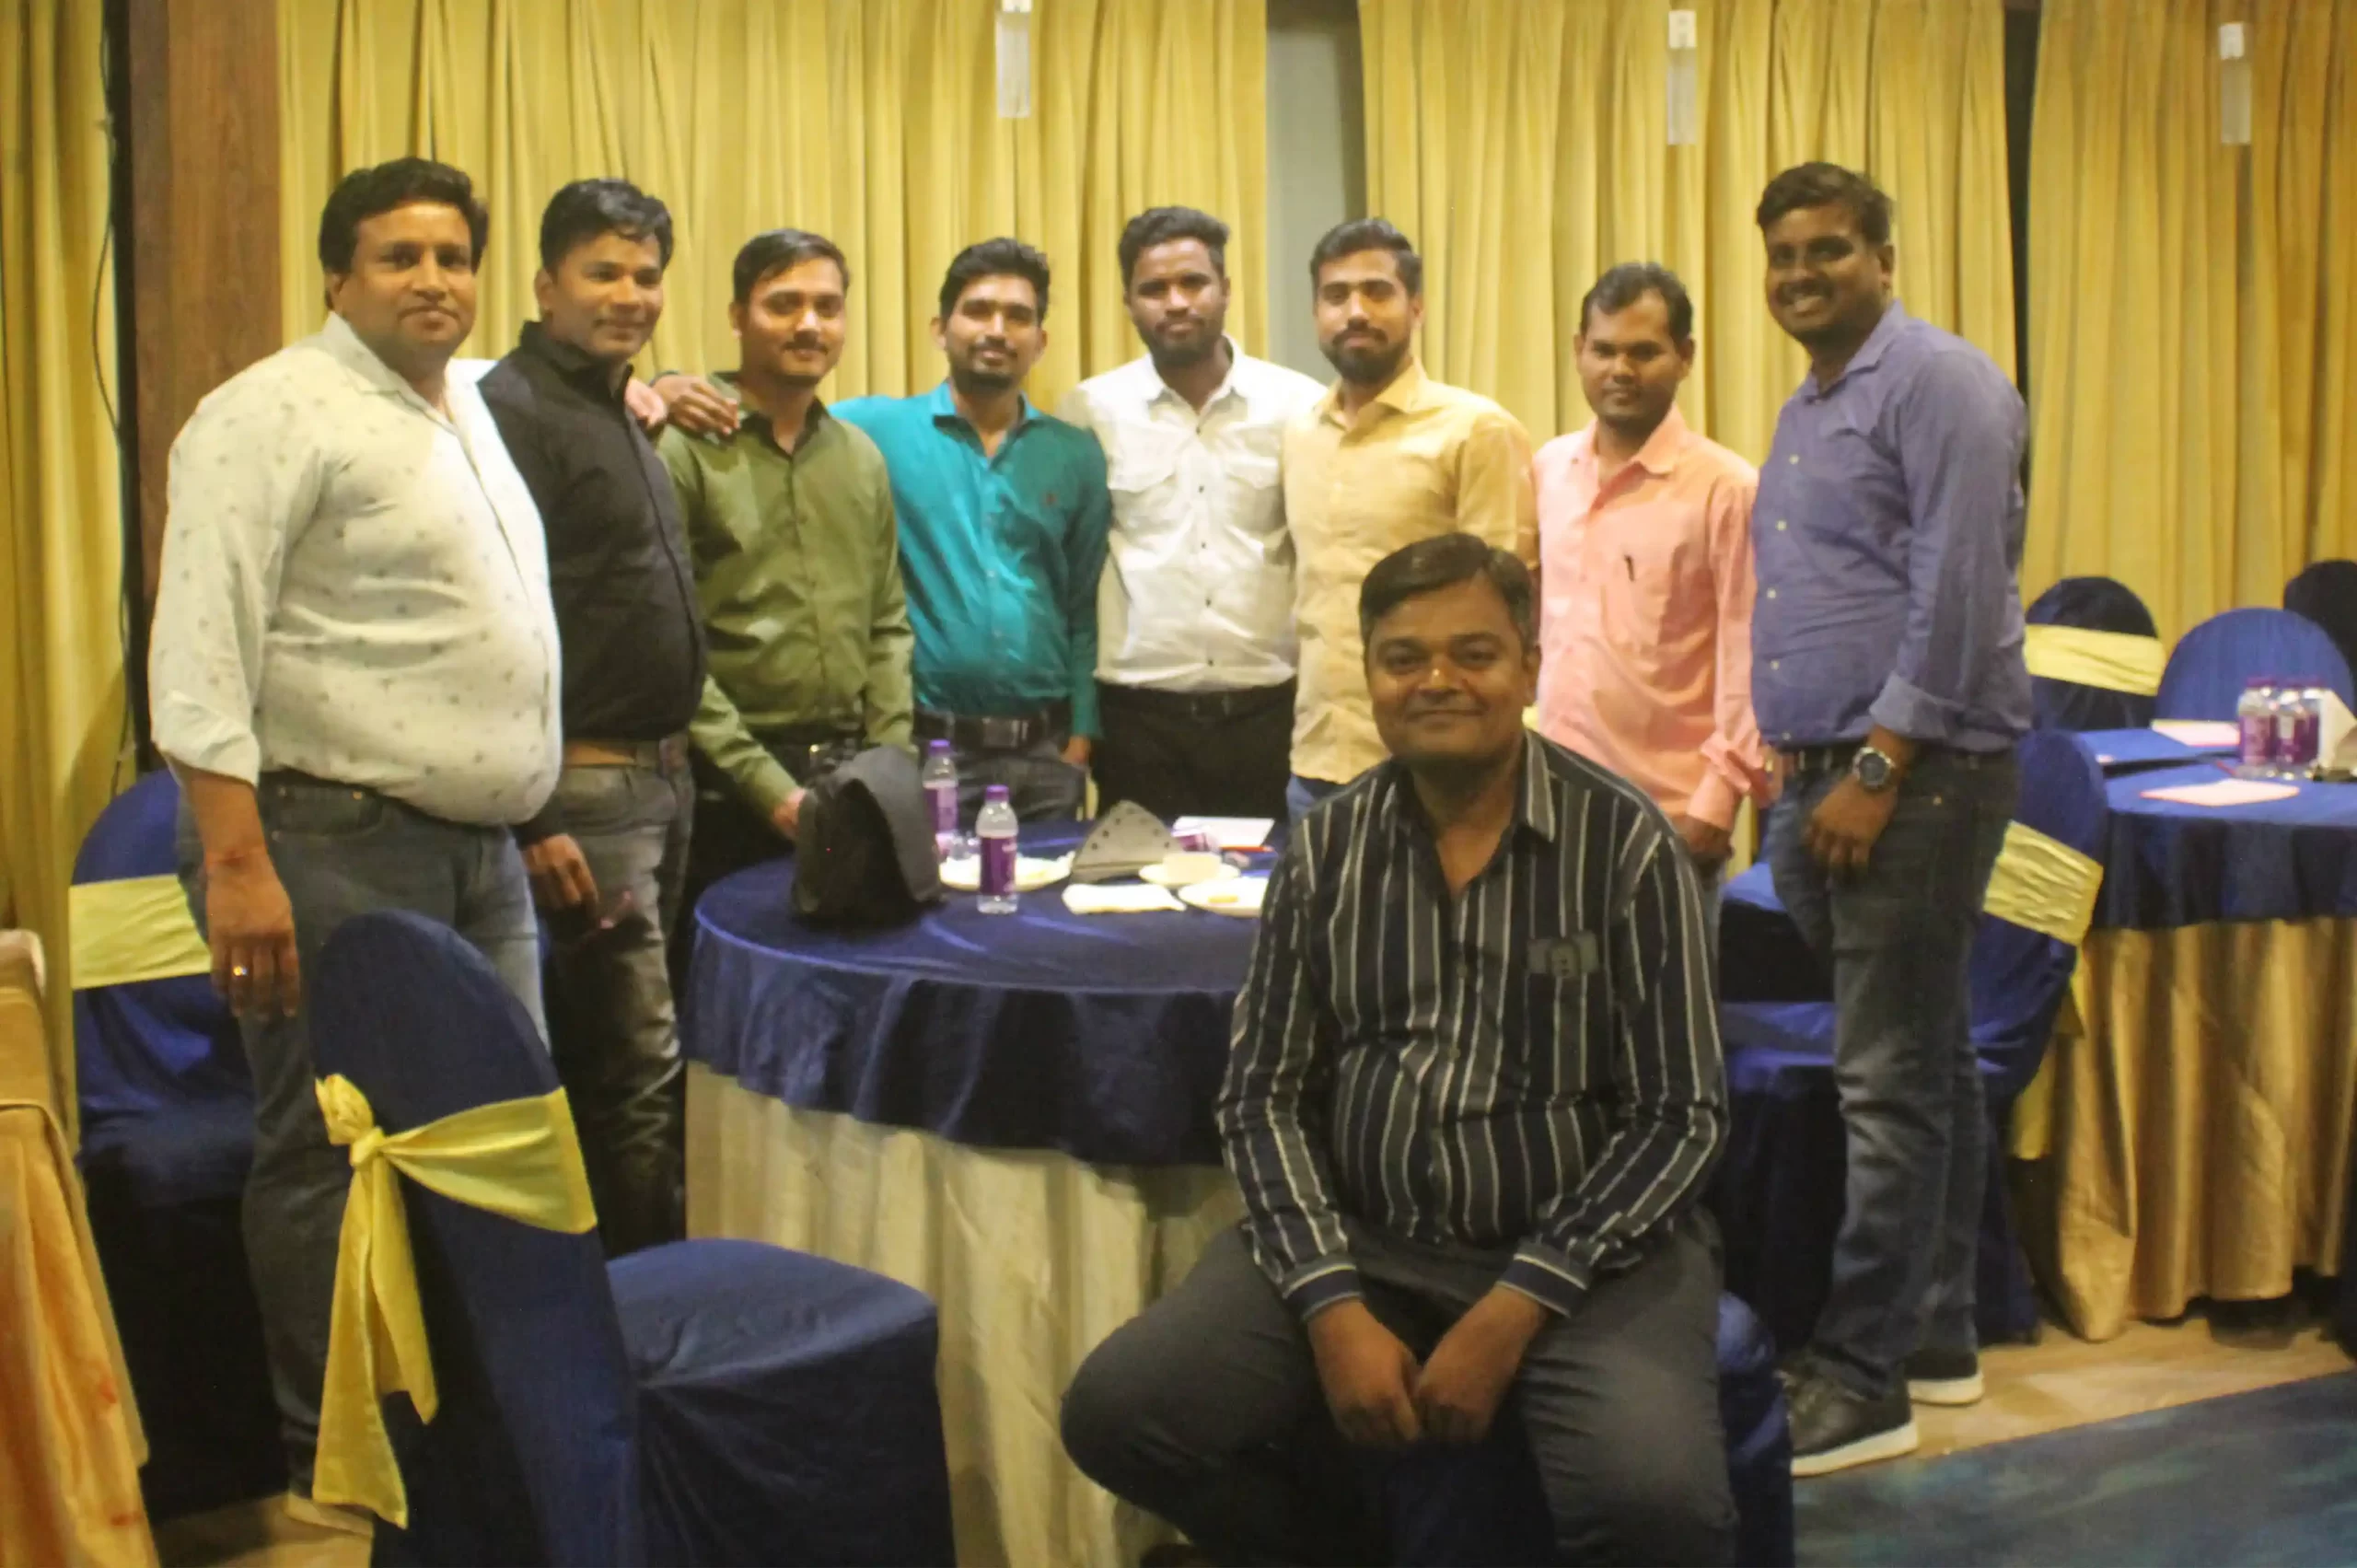 Clarion IT Software Team Chhattisgarh Infotech Promotion Society clarion group photo scaled